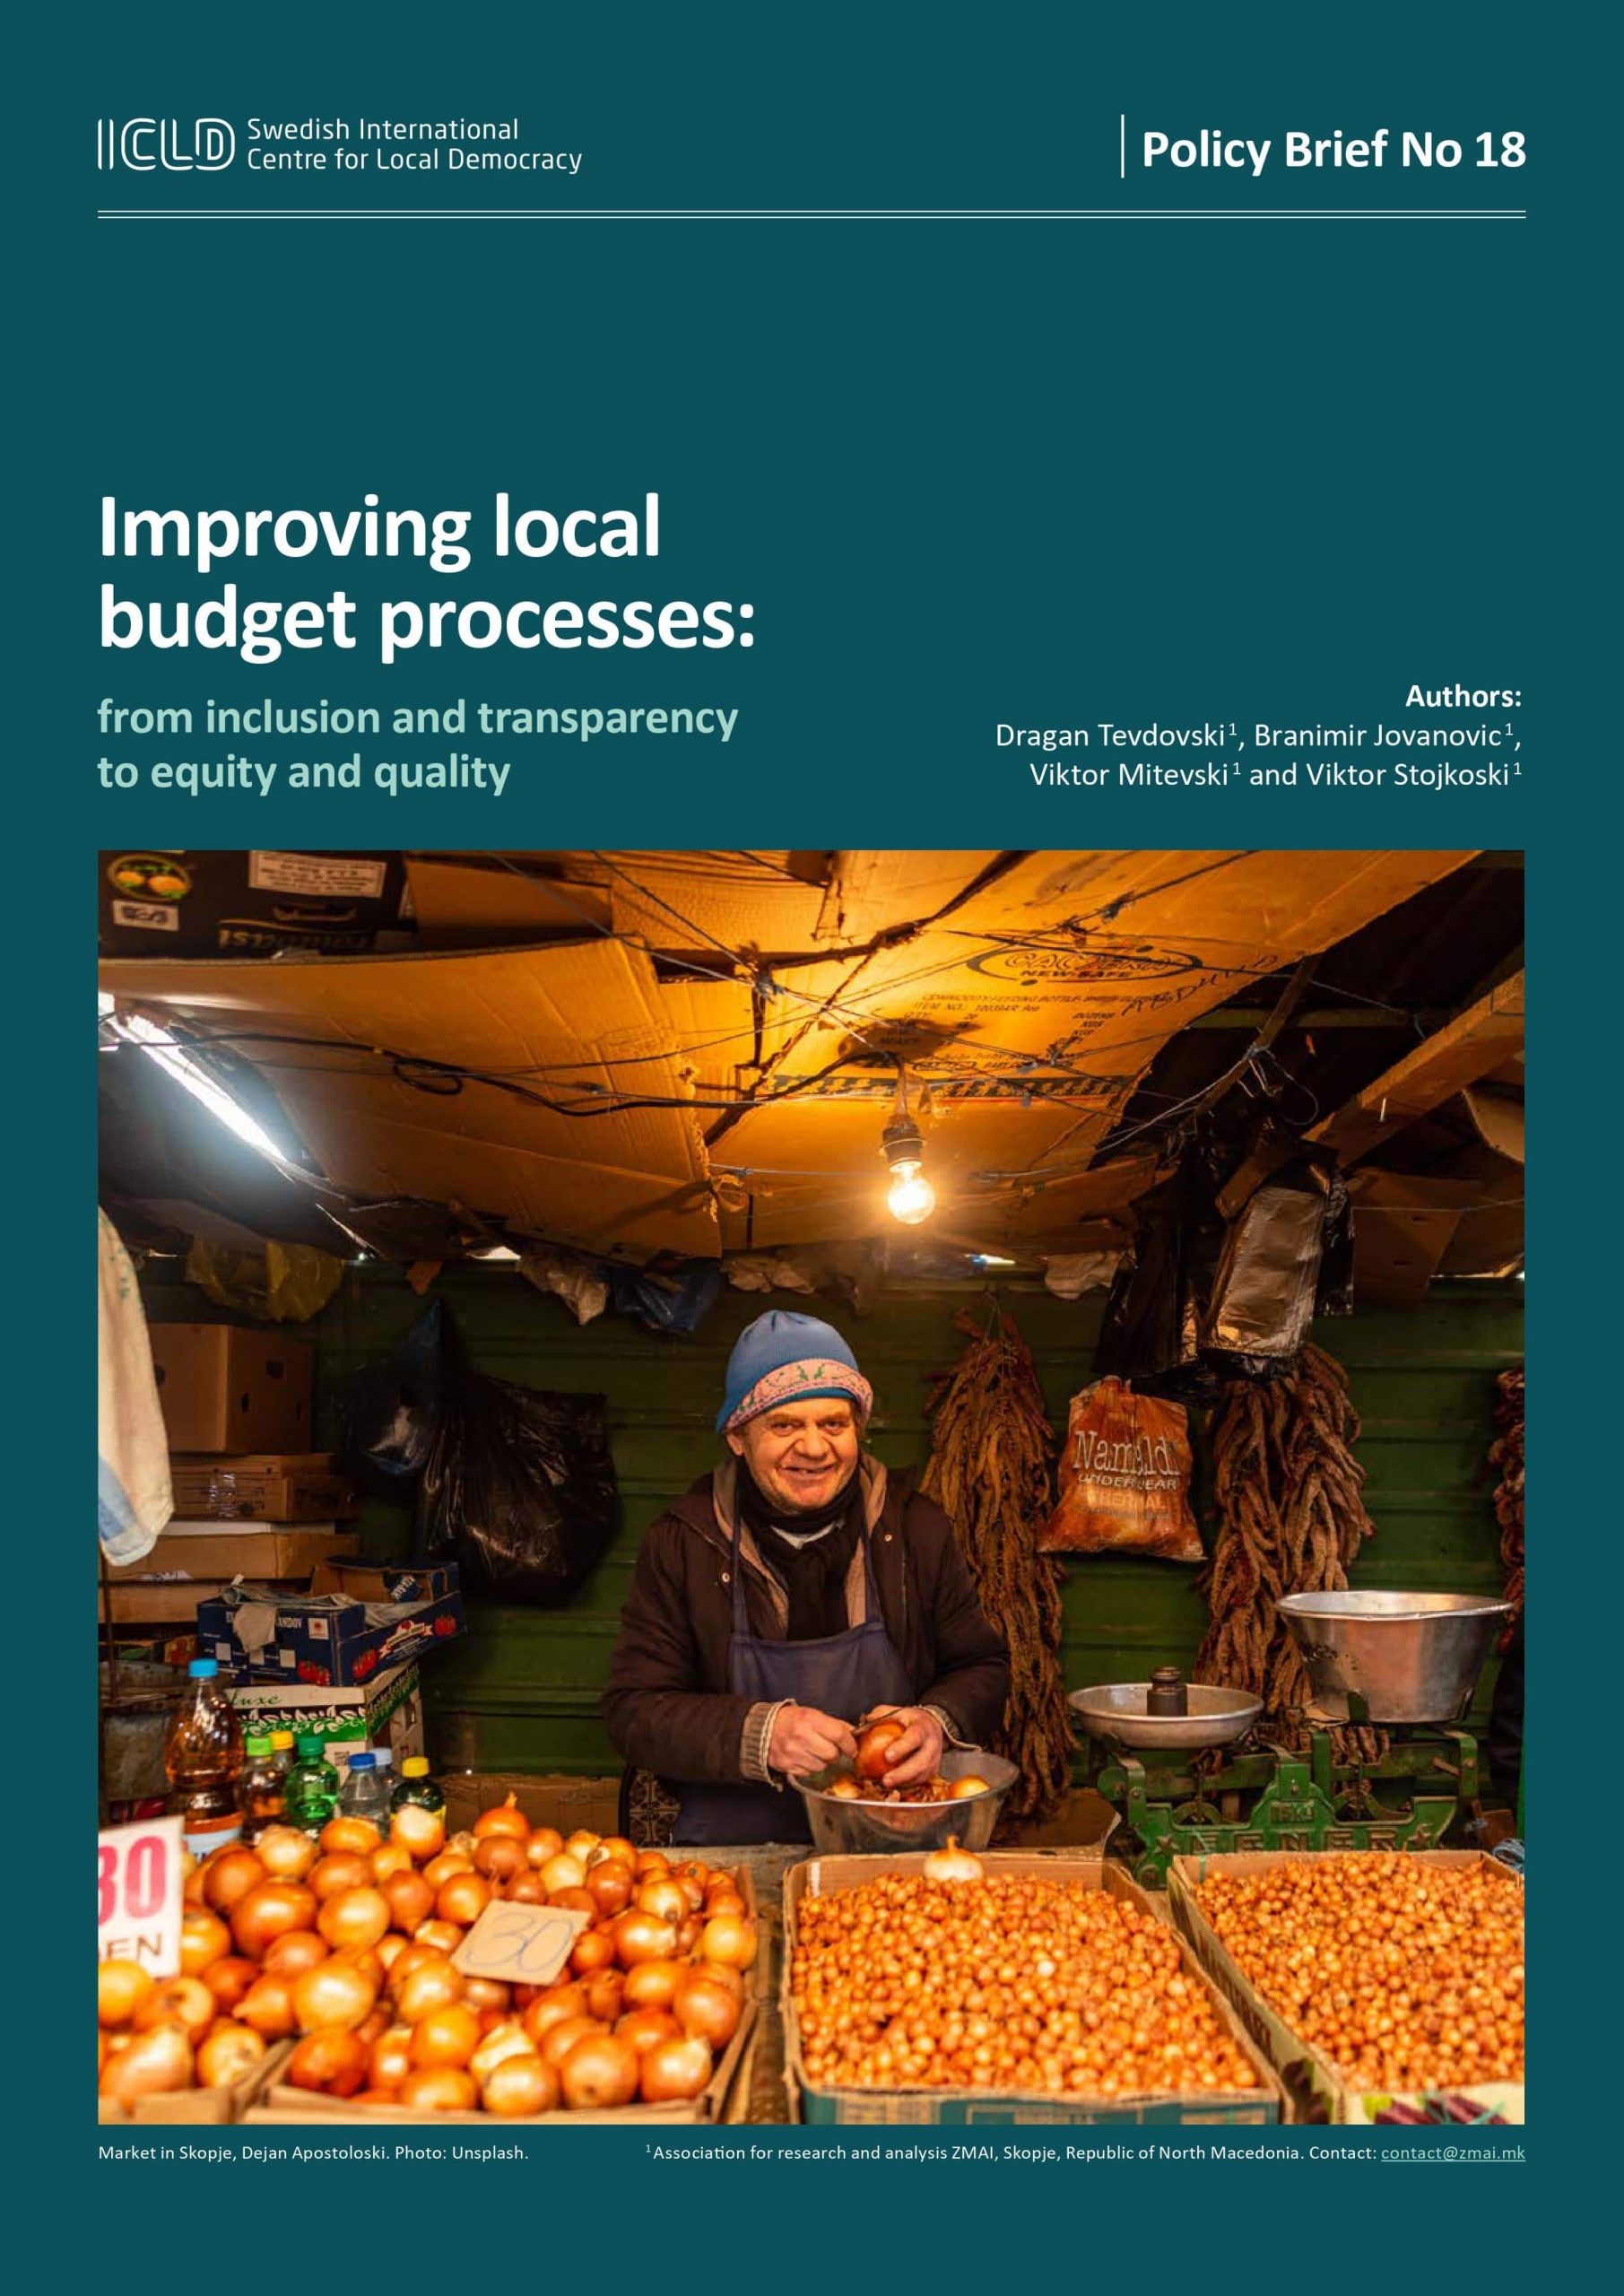 Improving local budget processes: from inclusion and transparency to equity and quality